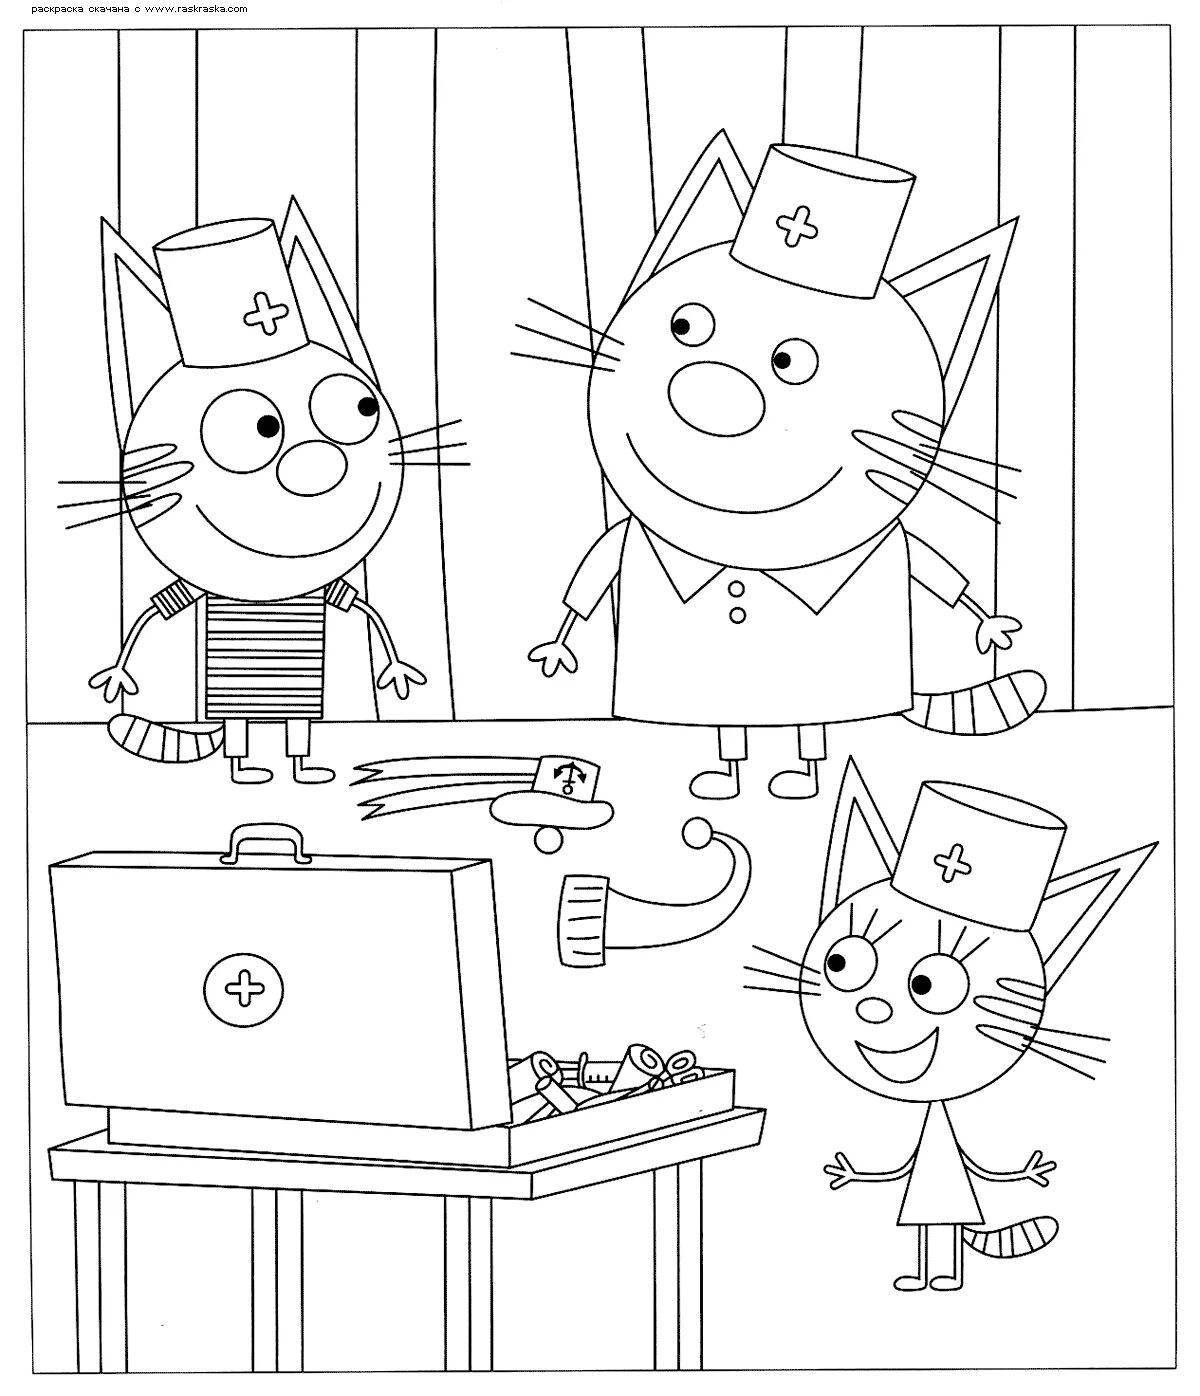 Color-frenzy coloring page game 3 cats